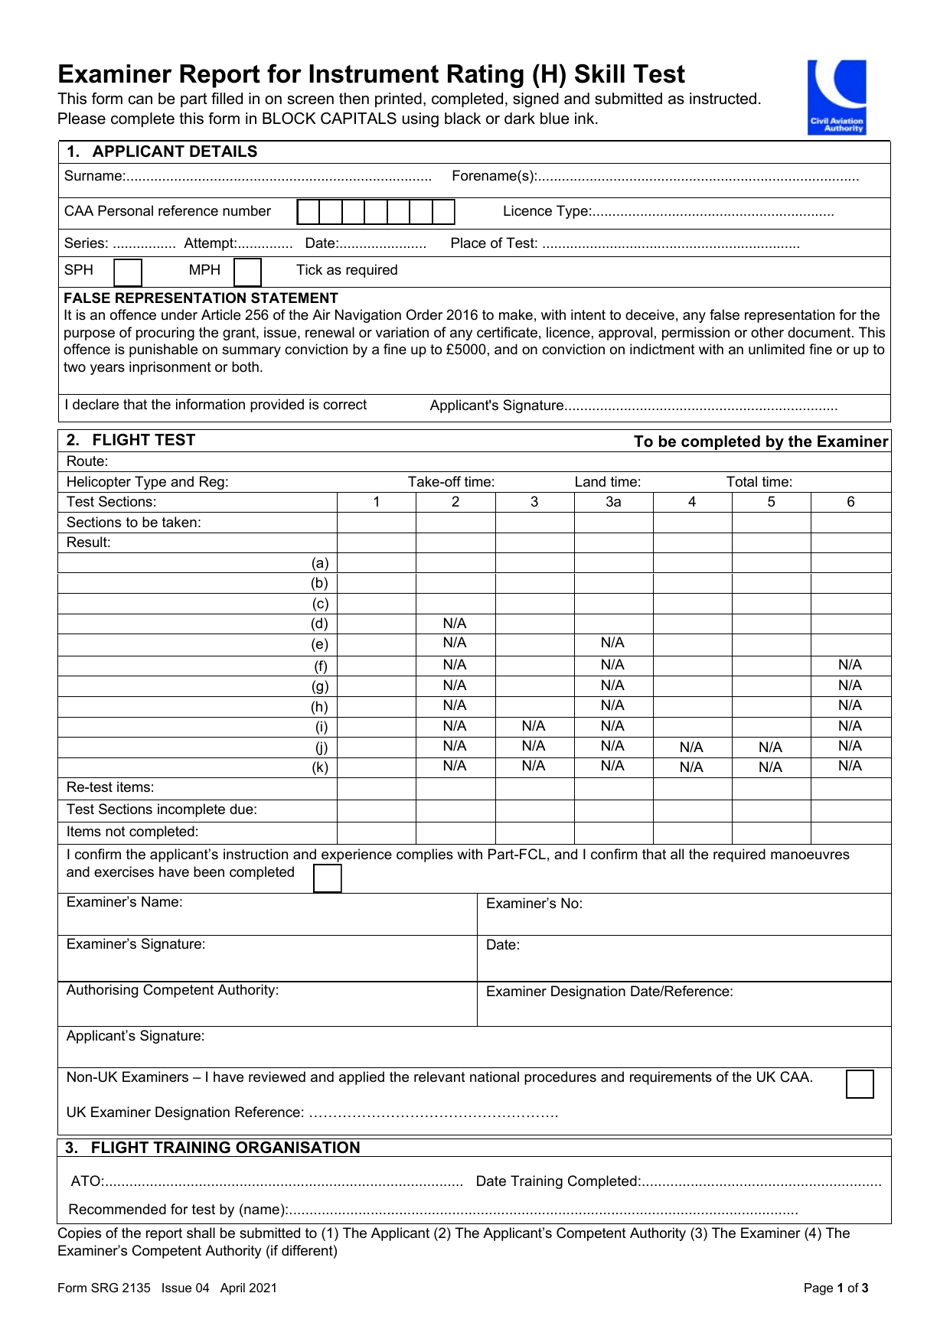 Form SRG2135 Examiner Report for Instrument Rating (H) Skill Test - United Kingdom, Page 1